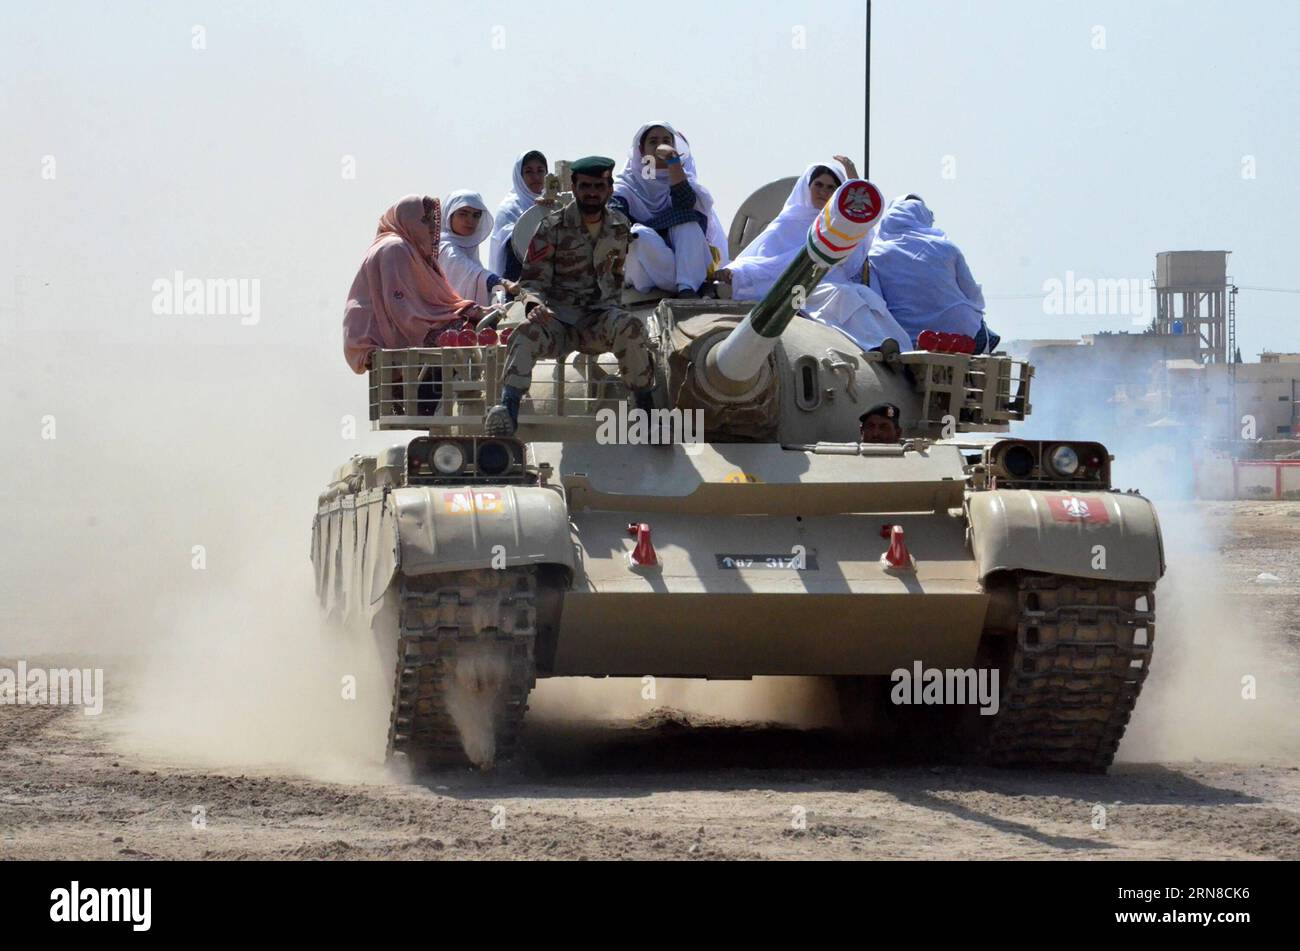 (151017) -- QUETTA, Oct. 17, 2015 -- Female students ride on a tank during a weapon training session in southwest Pakistan s Quetta, Oct. 17, 2015. Authorities have commenced special weapon training sessions for female students of Sardar Bahadur Khan Women s University in Quetta. ) PAKISTAN-QUETTA-FEMALE STUDENTS-WEAPON-TRAINING Irfan PUBLICATIONxNOTxINxCHN   Quetta OCT 17 2015 Female Students Ride ON a Tank during a Weapon Training Session in Southwest Pakistan S Quetta OCT 17 2015 Authorities have commenced Special Weapon Training Sessions for Female Students of Sardar Bahadur Khan Women S U Stock Photo